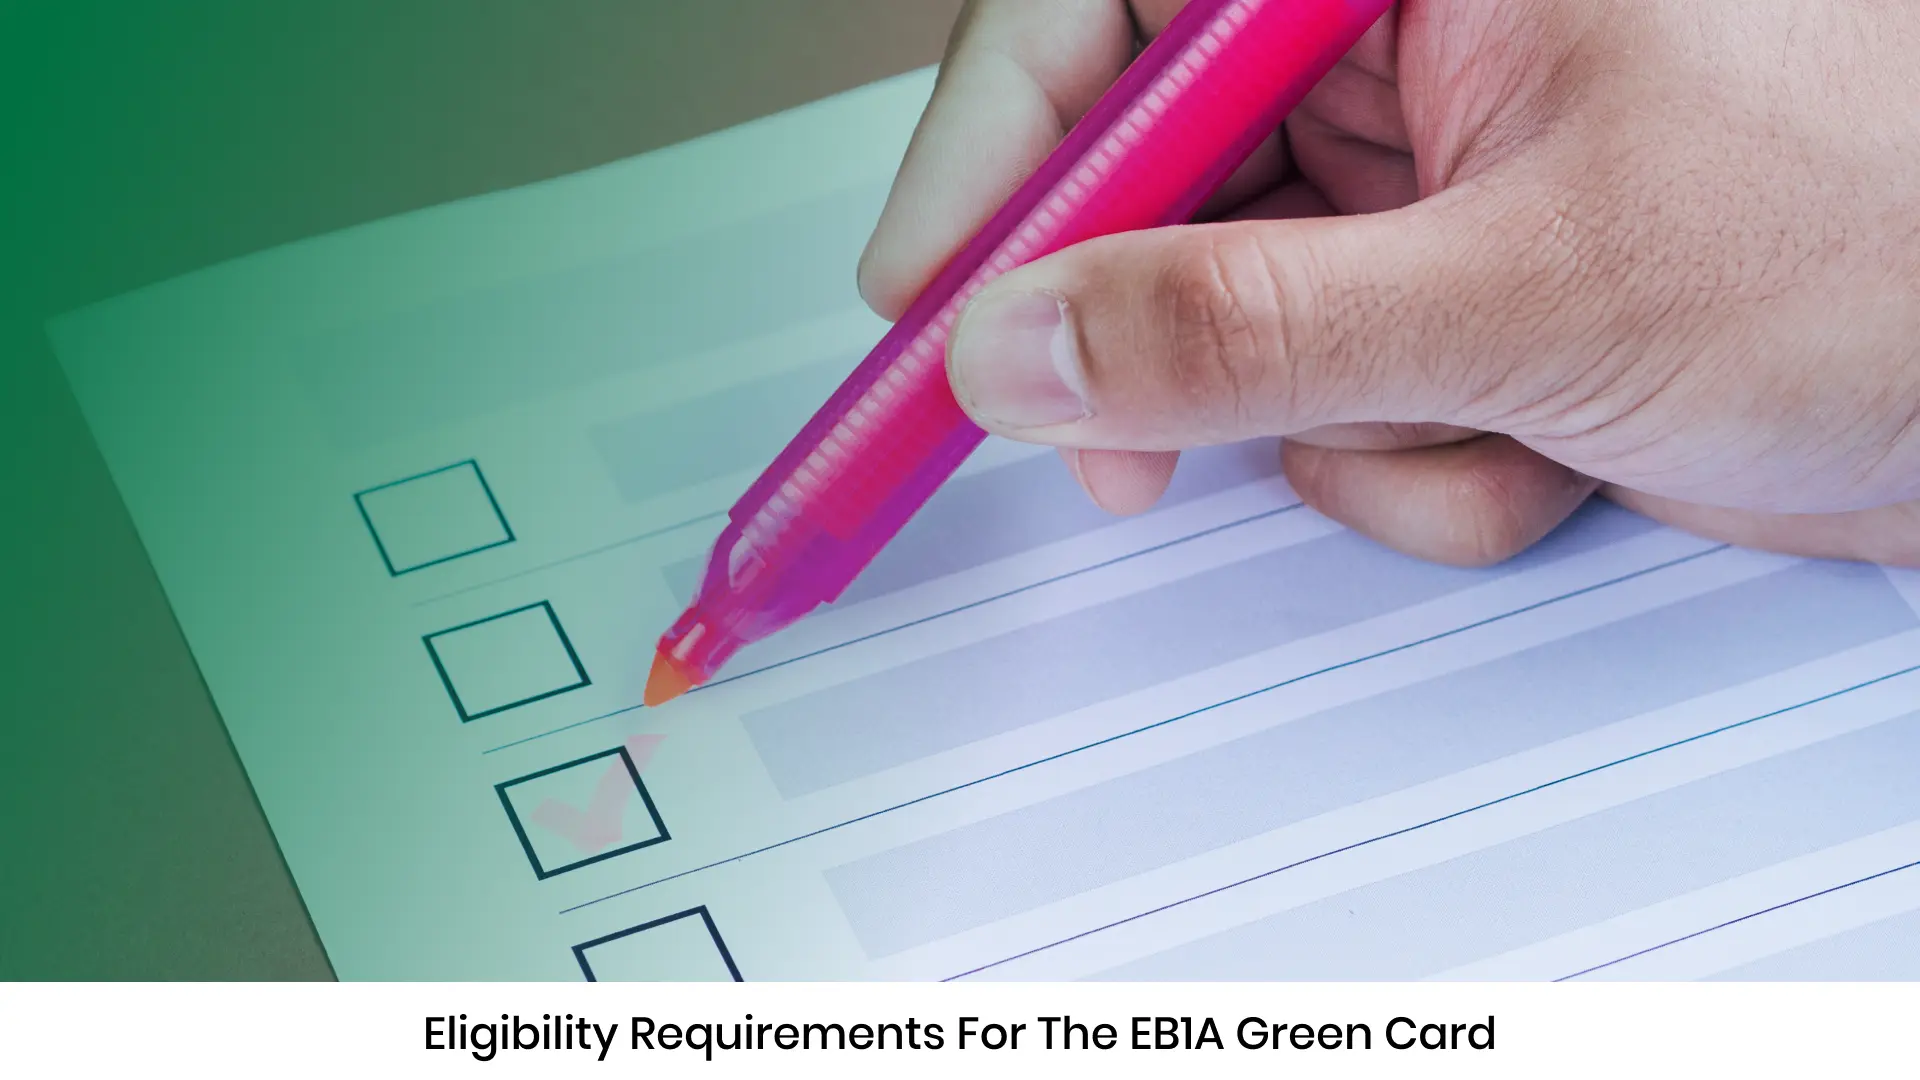 Eligibility Requirements for the EB1A Green Card